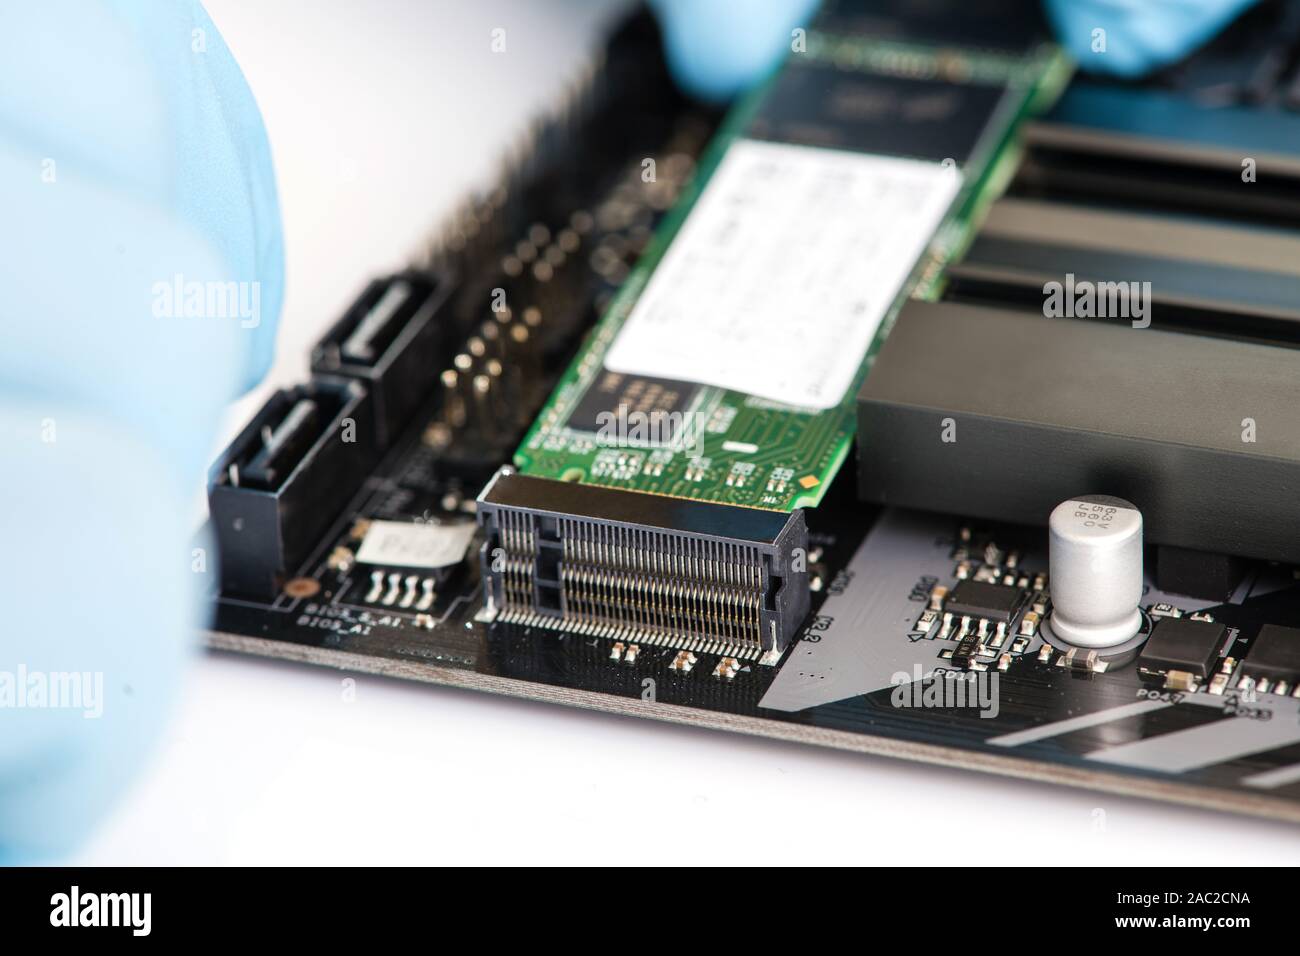 Ssd disk hard drive inside pc motherboard Stock Photo - Alamy